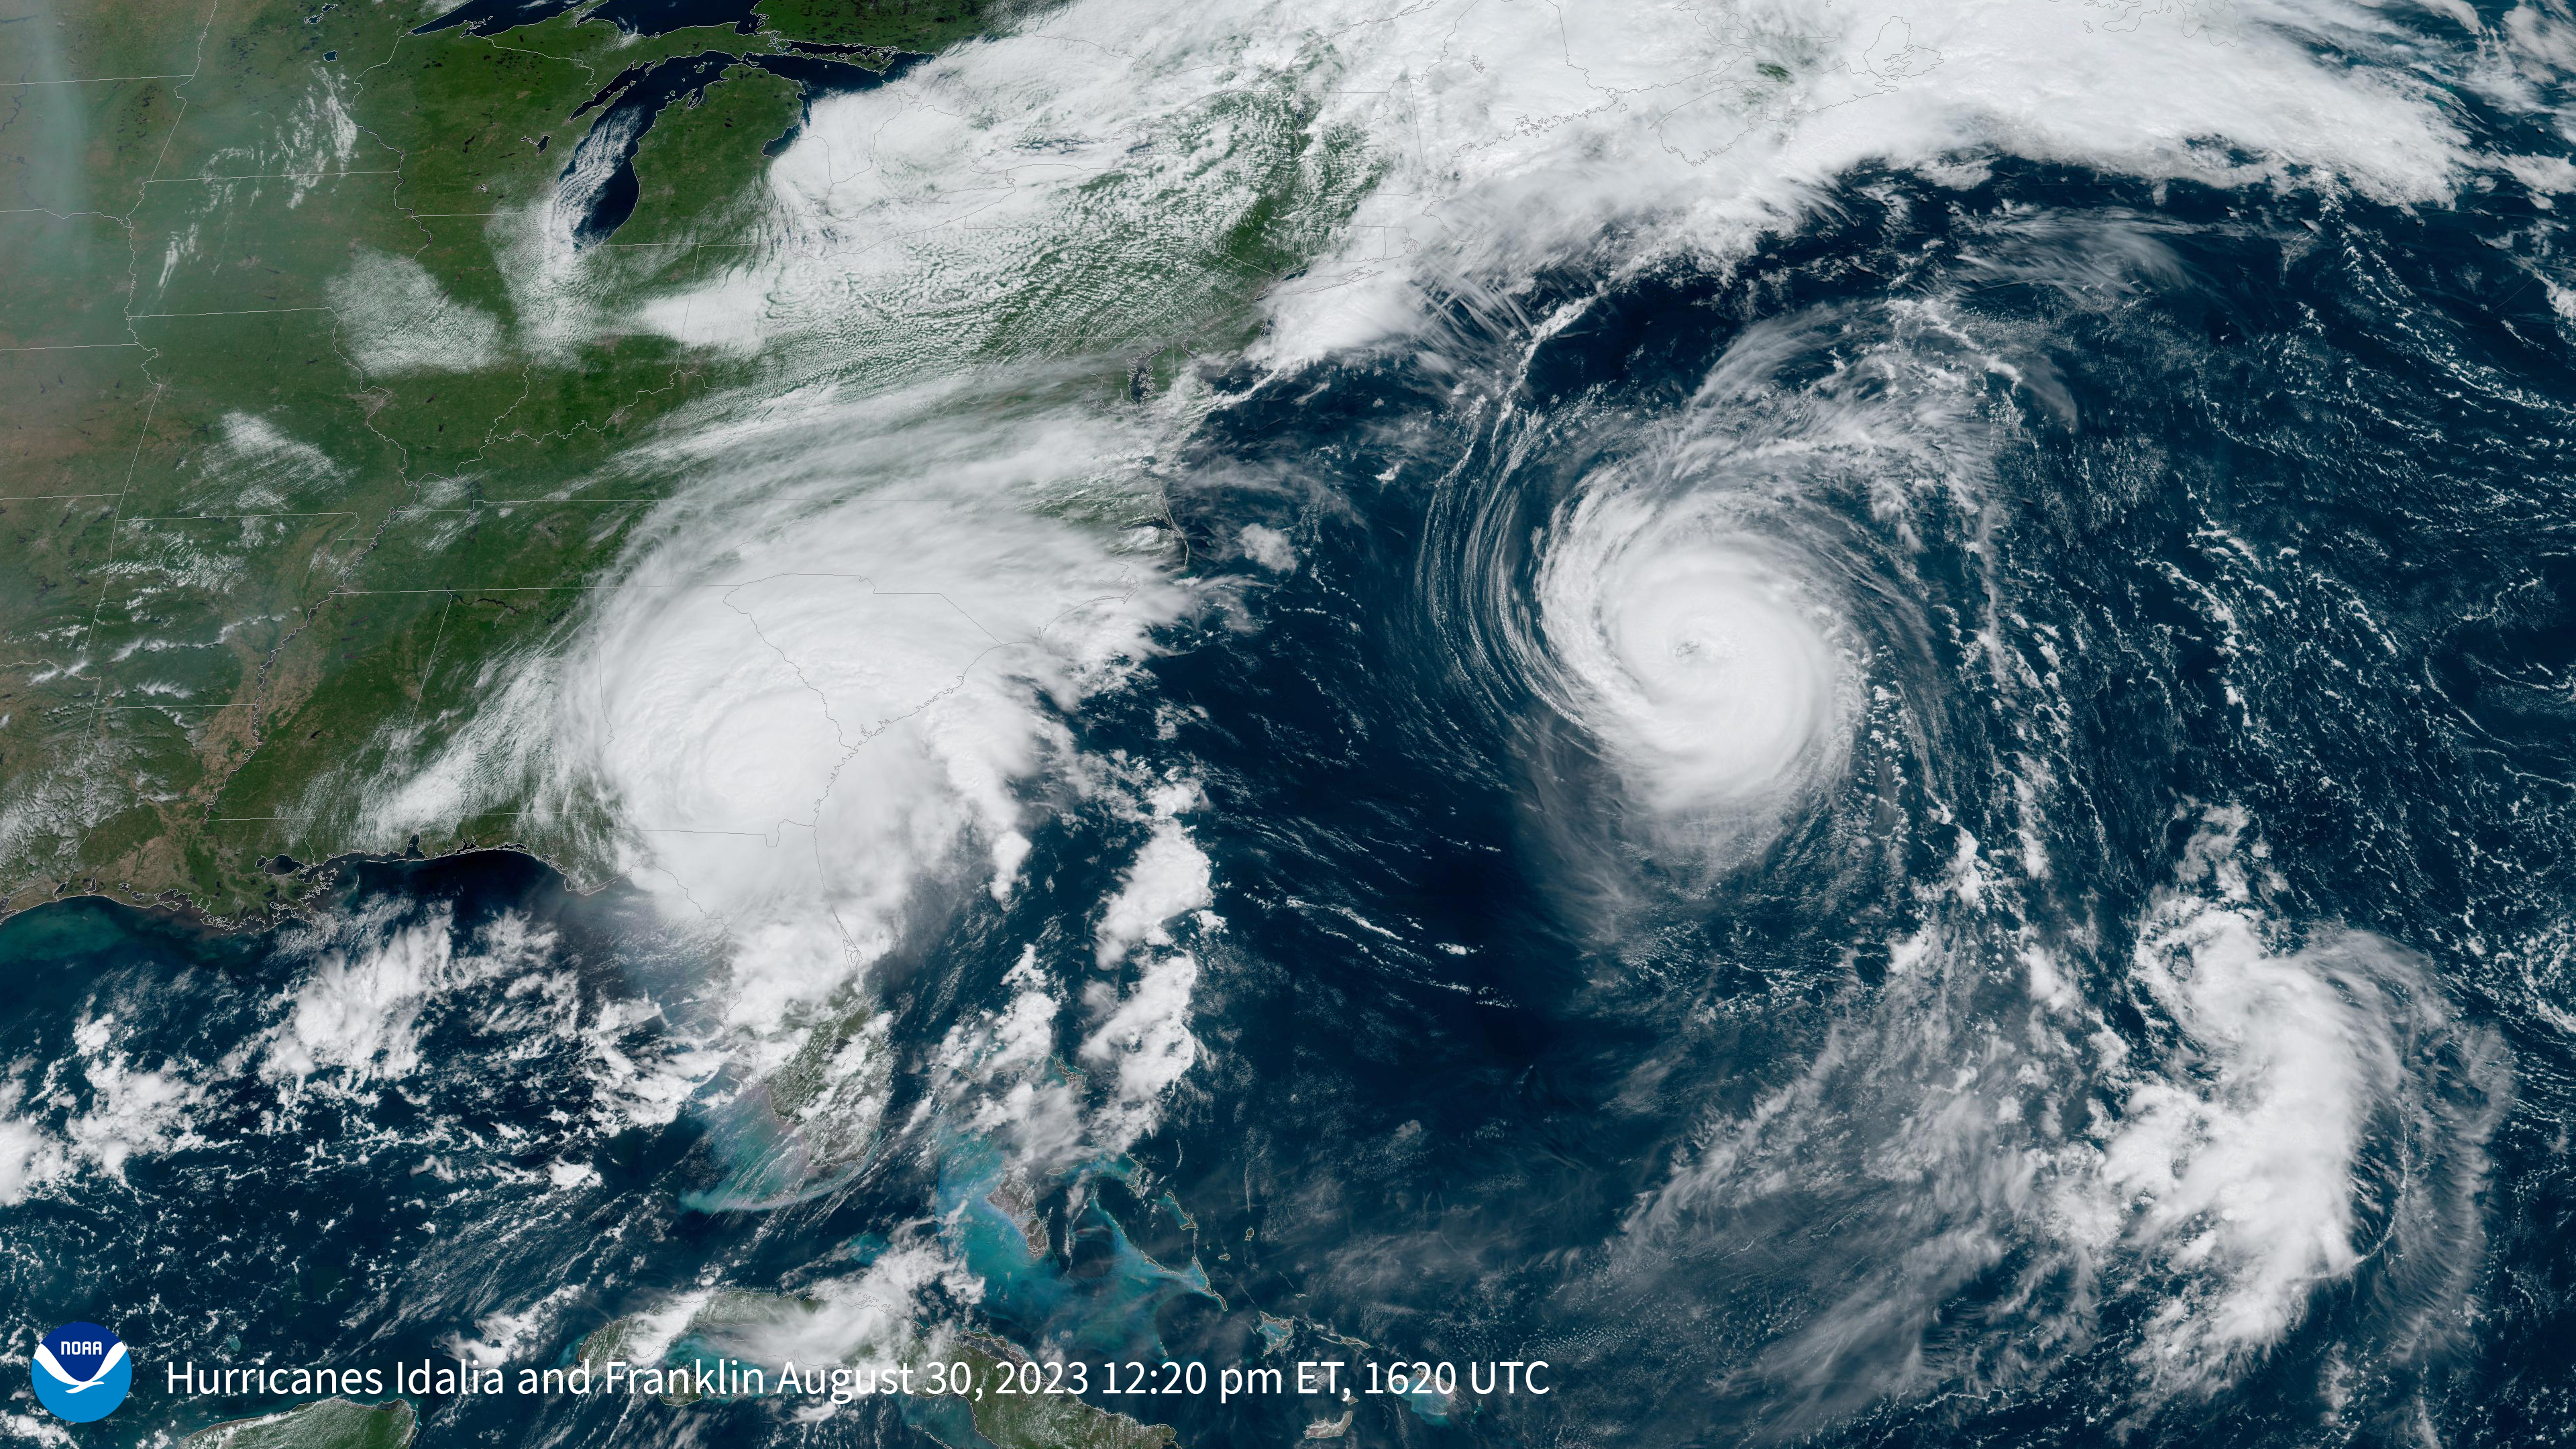 Satellite imagery showing the white clouds of two hurricanes against the blue ocean and green land of the U.S. East Coast